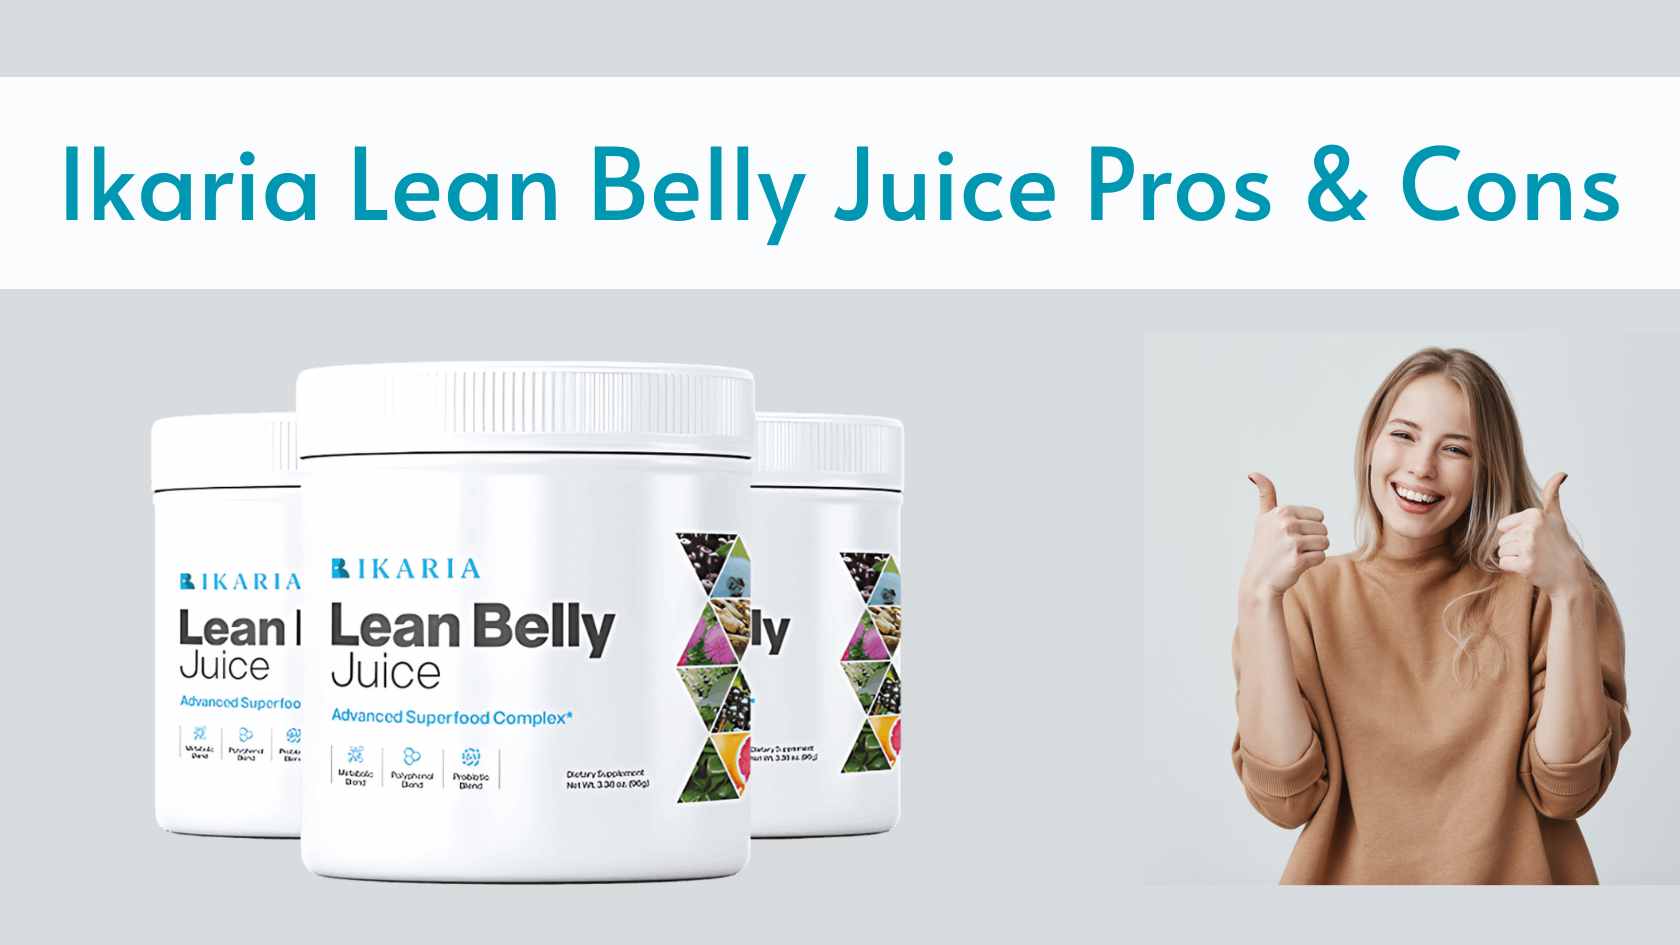 Ikaria Lean Belly Juice Pros & Cons